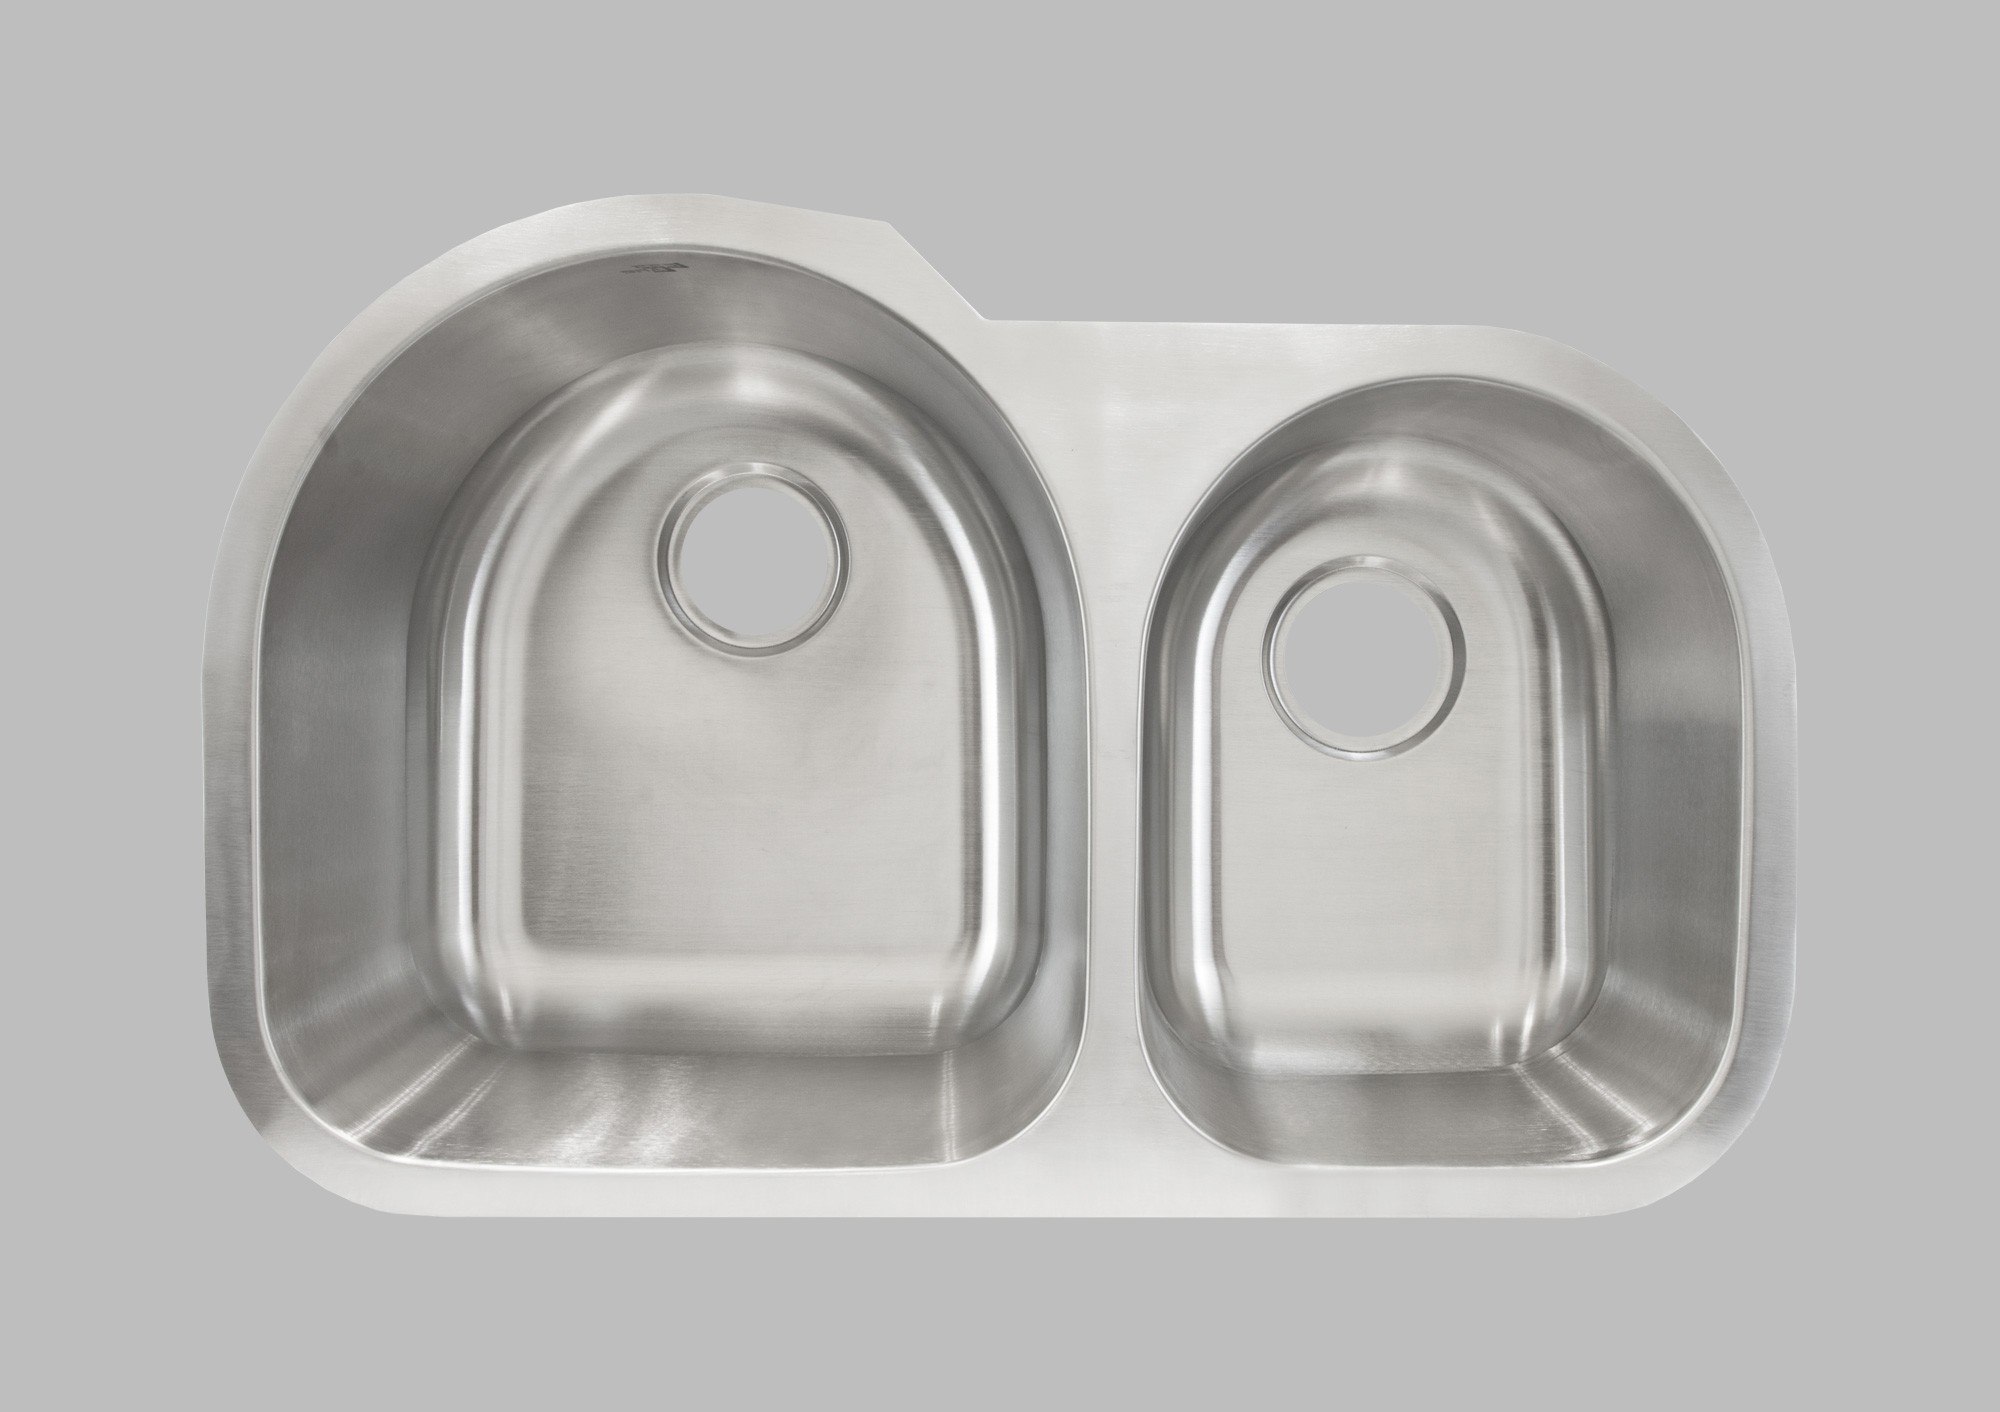 LESS CARE L203R 30 INCH UNDERMOUNT DOUBLE BOWL KITCHEN SINK